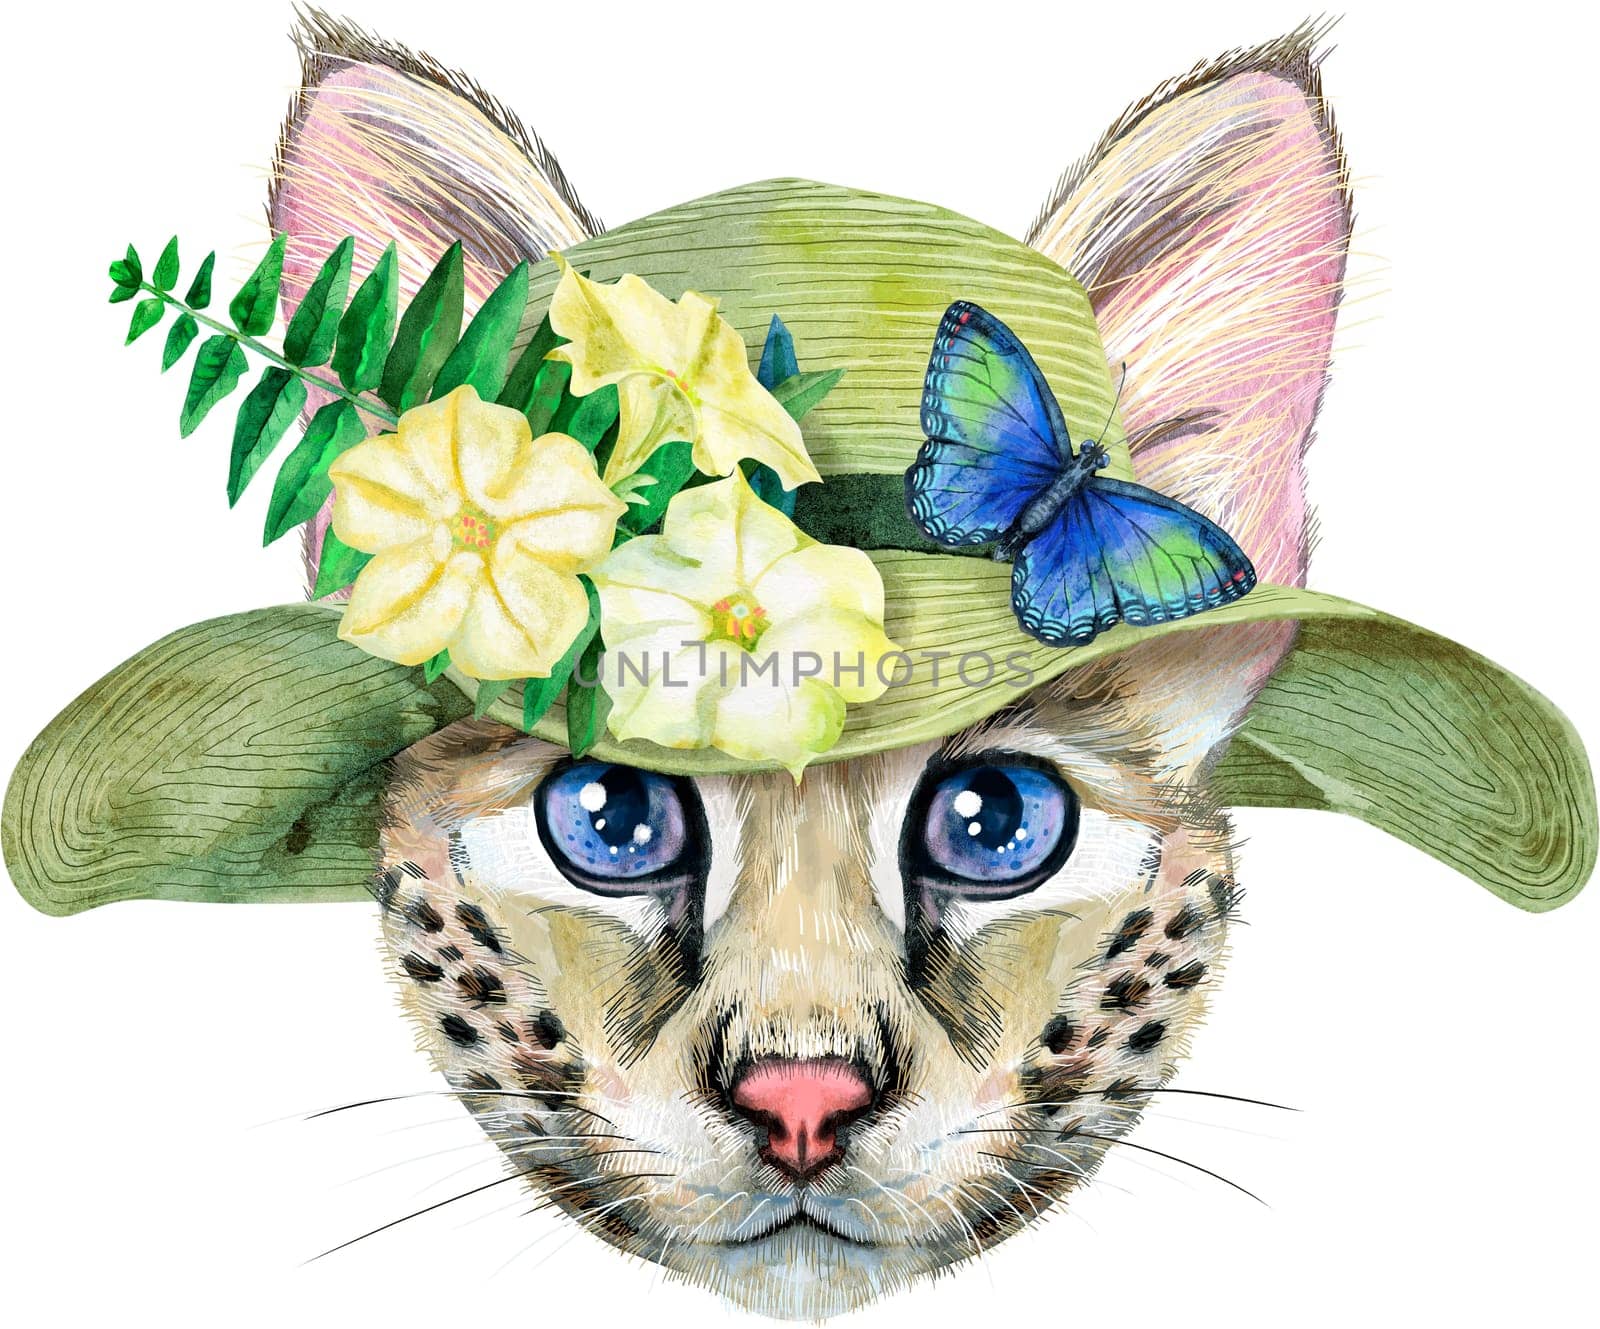 Lovely closeup portrait Savannah cat in summer hat with flowers and butterfly. Hand drawn water colour painting on white background by NataOmsk